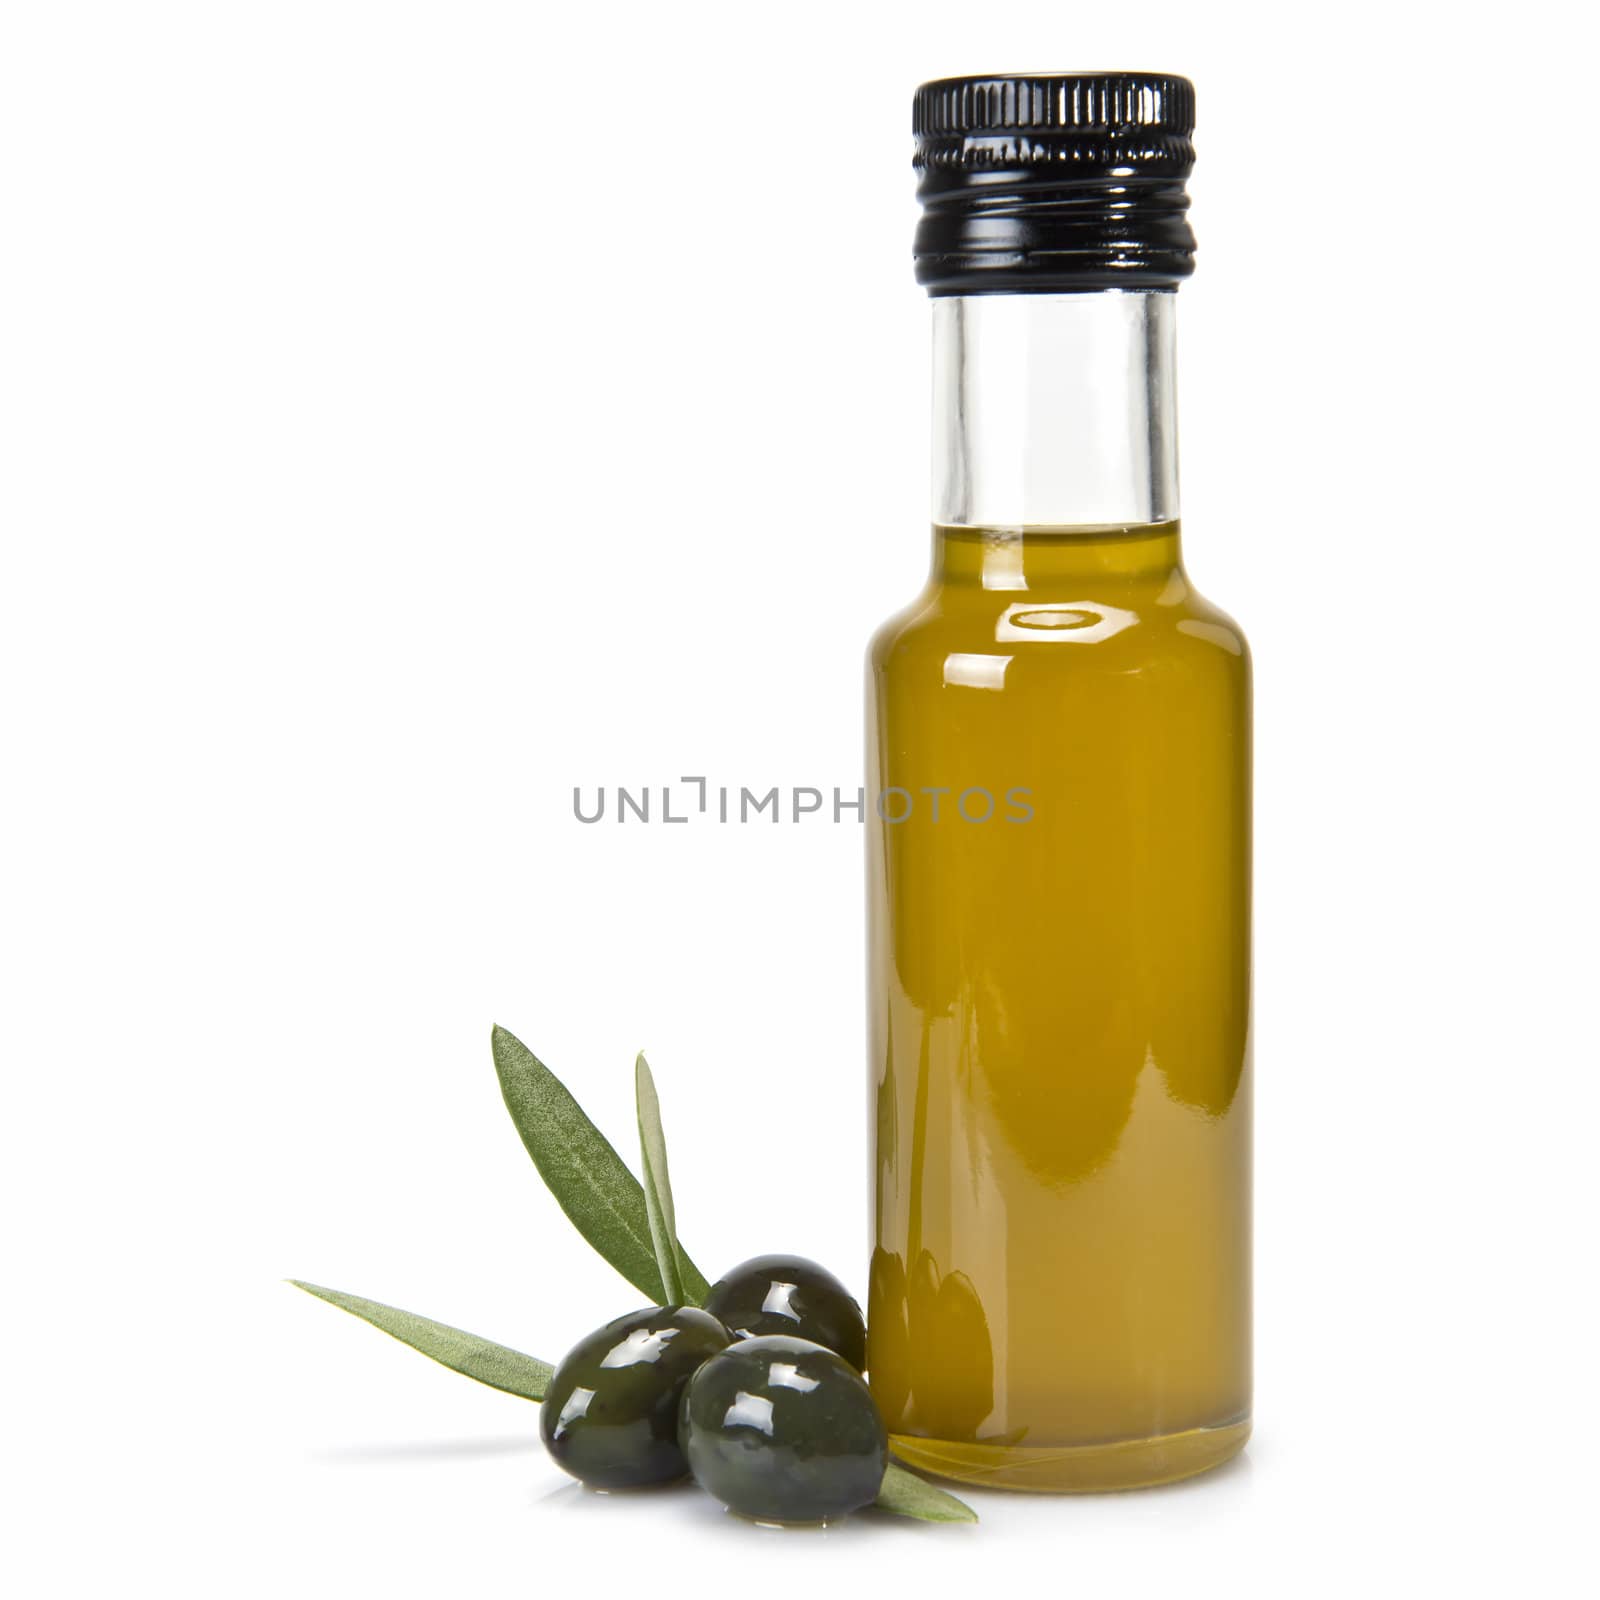 Premium olive oil and beautiful olives by angelsimon